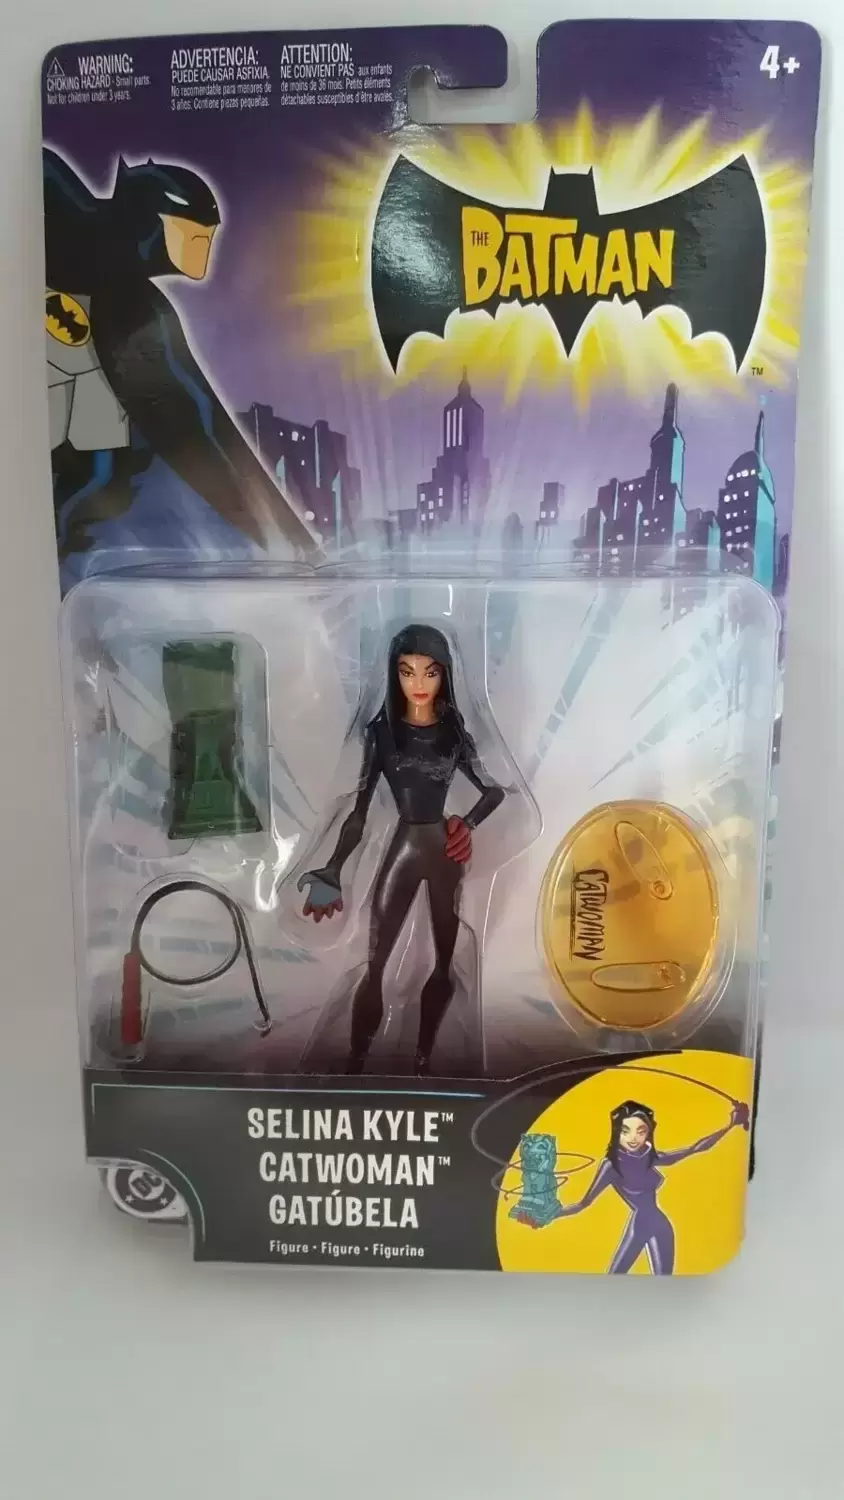 The Batman Animated - Selyna Kyle Catwoman